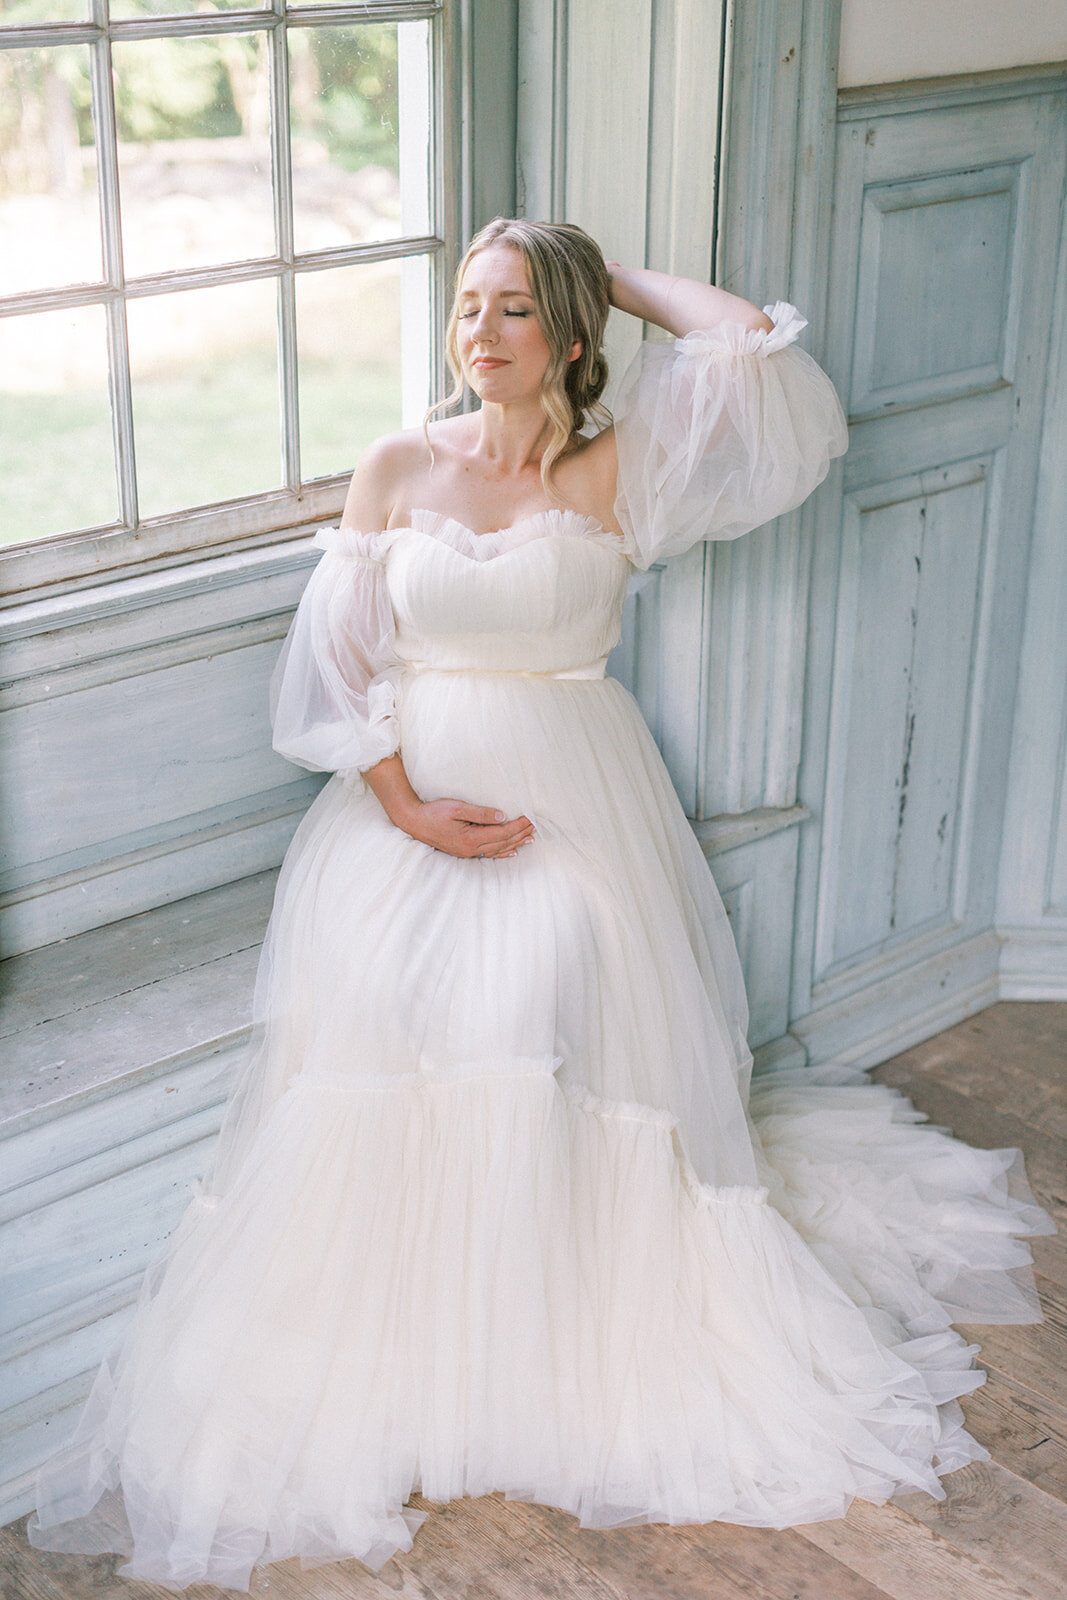 Pregnant mother sits in a window sill while wearing a flowy white gown during her maternity session at Salubria